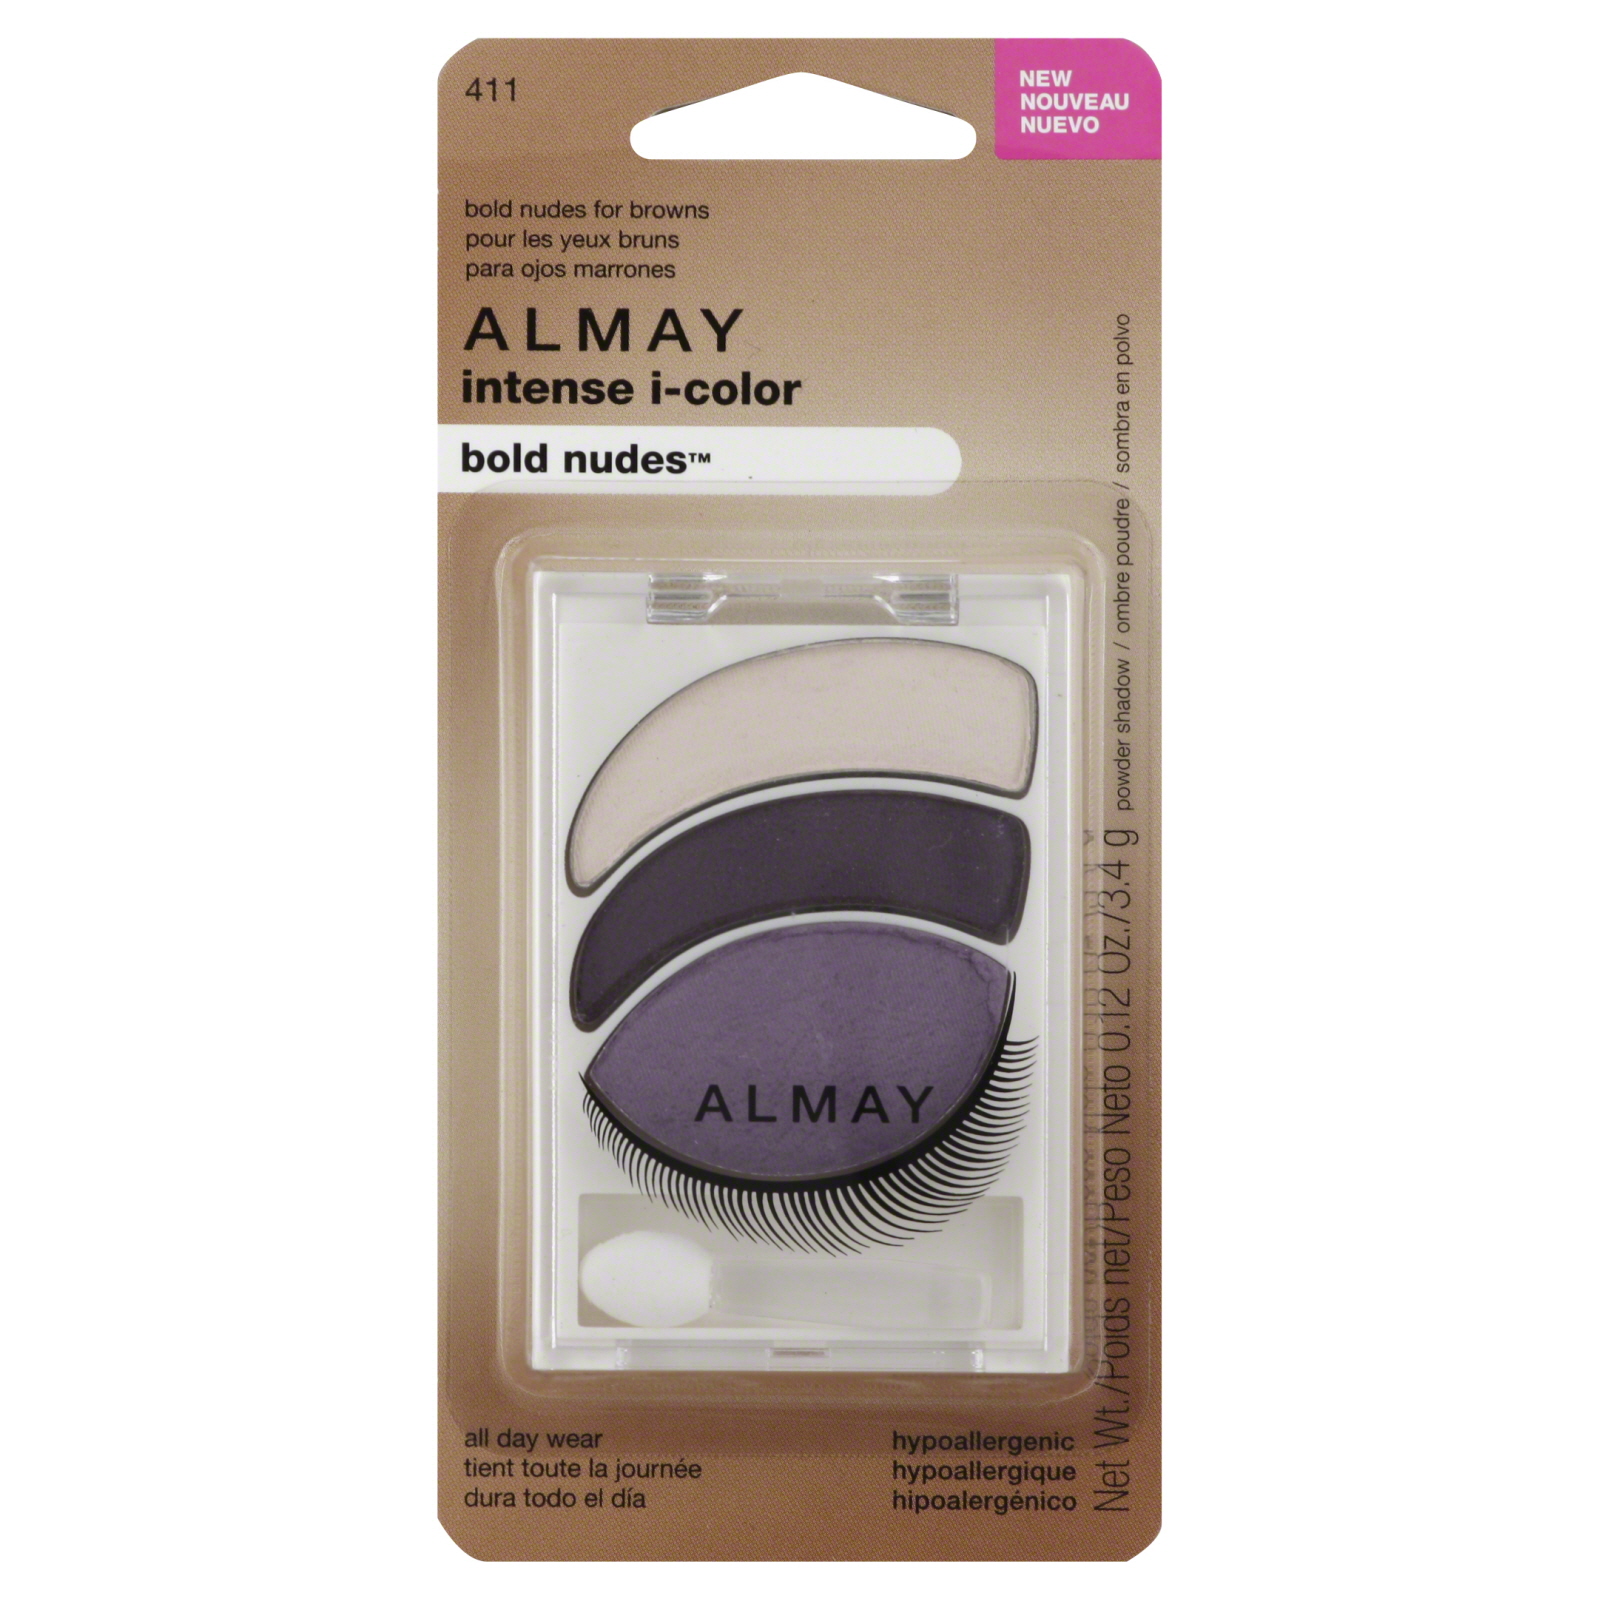 Almay Intense i-color Bold Nudes For Browns 0.12 oz